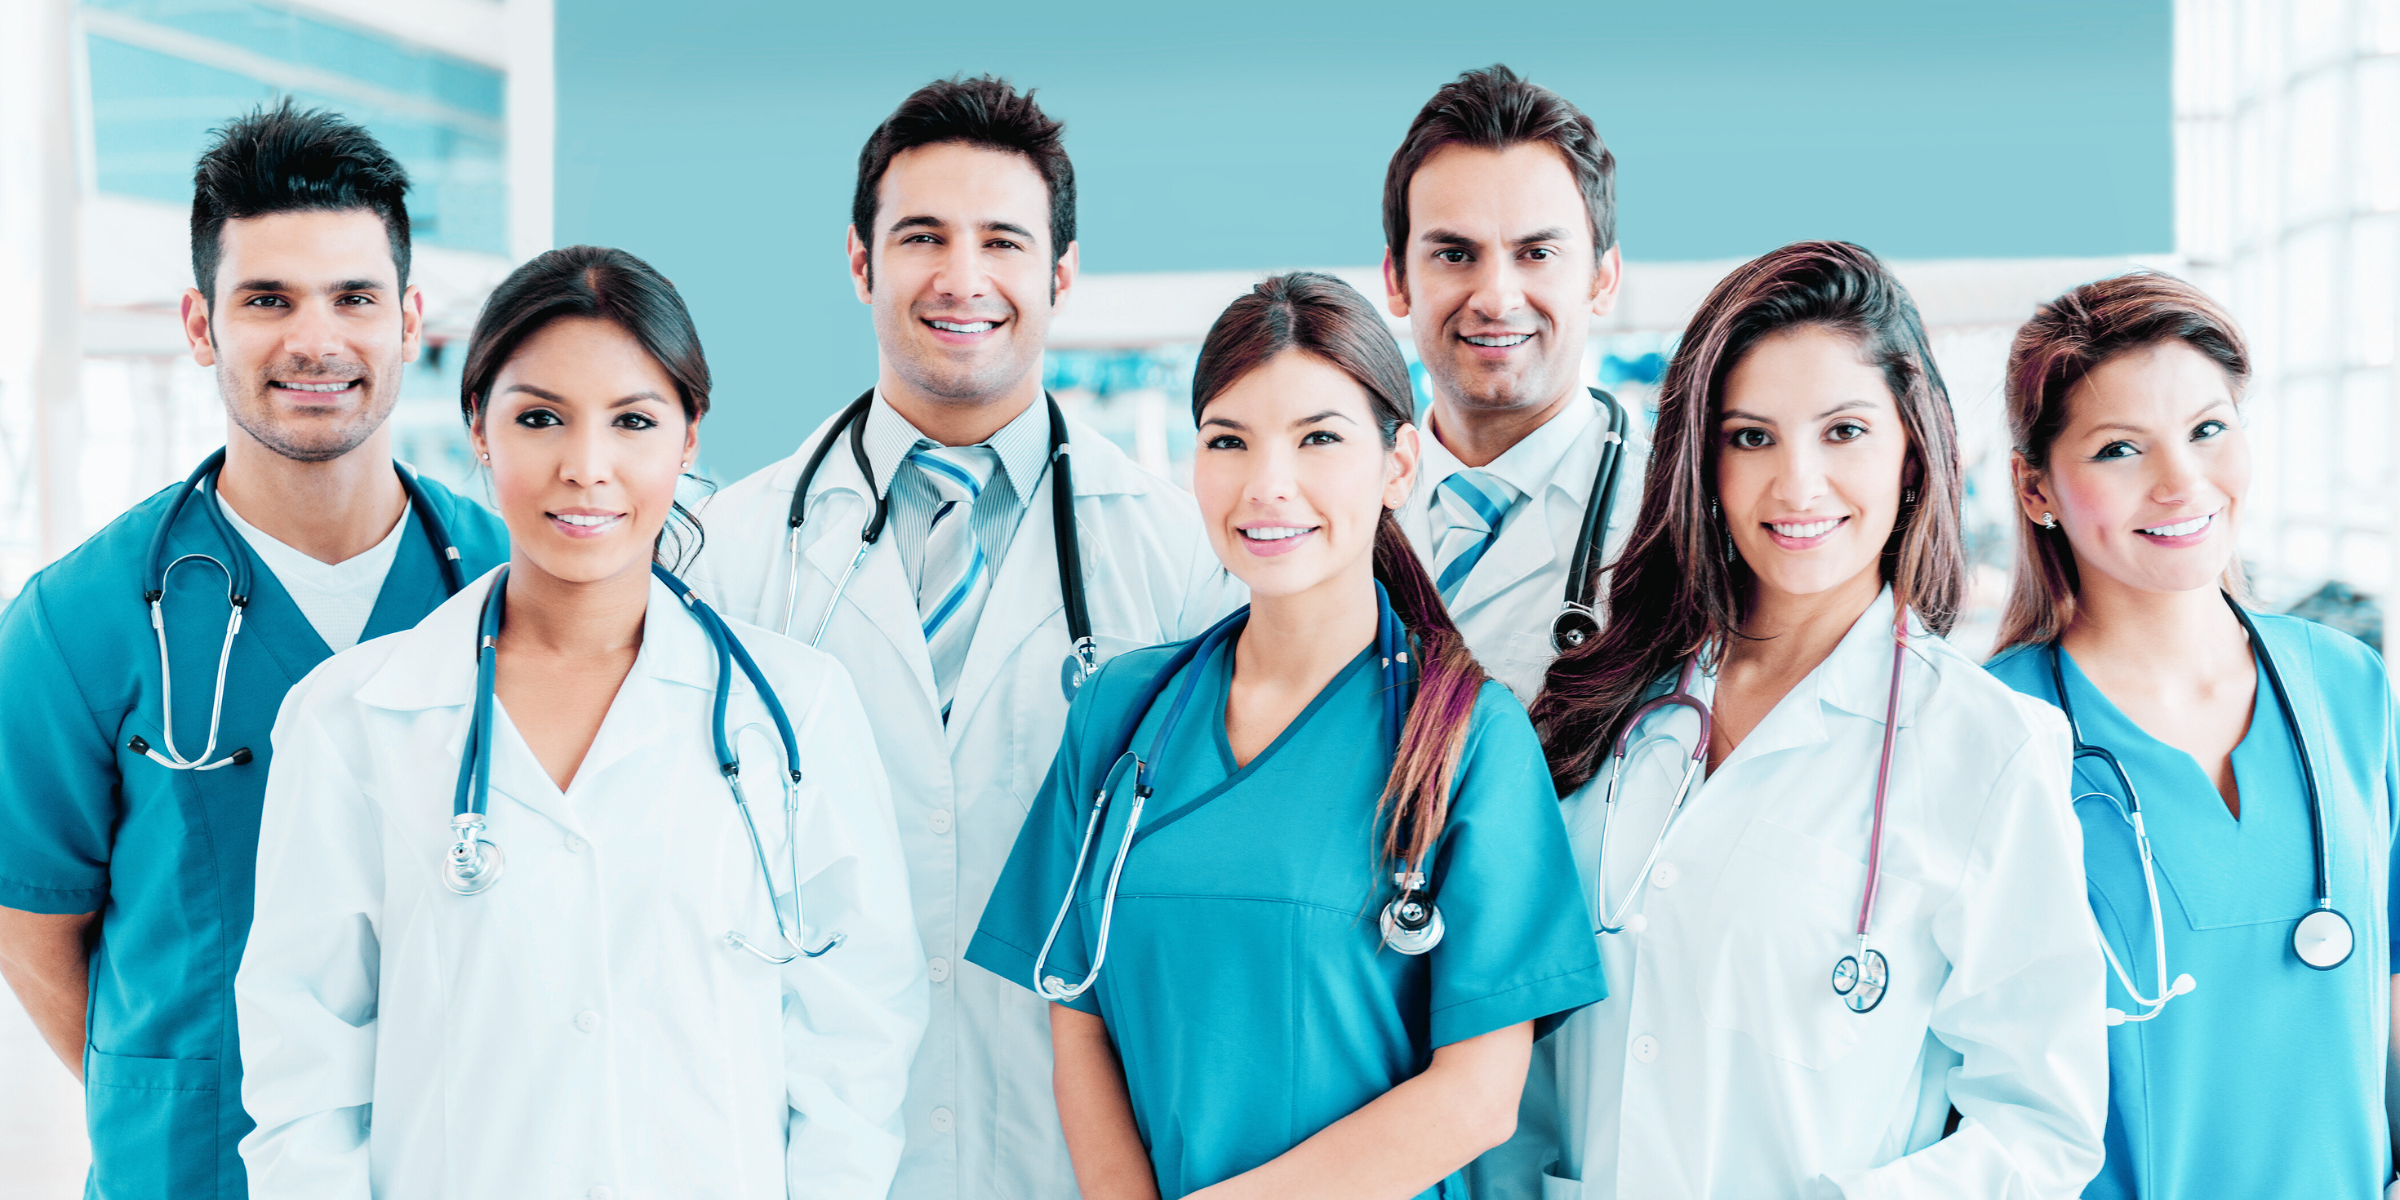 team of healthcare professional looking for career advancement